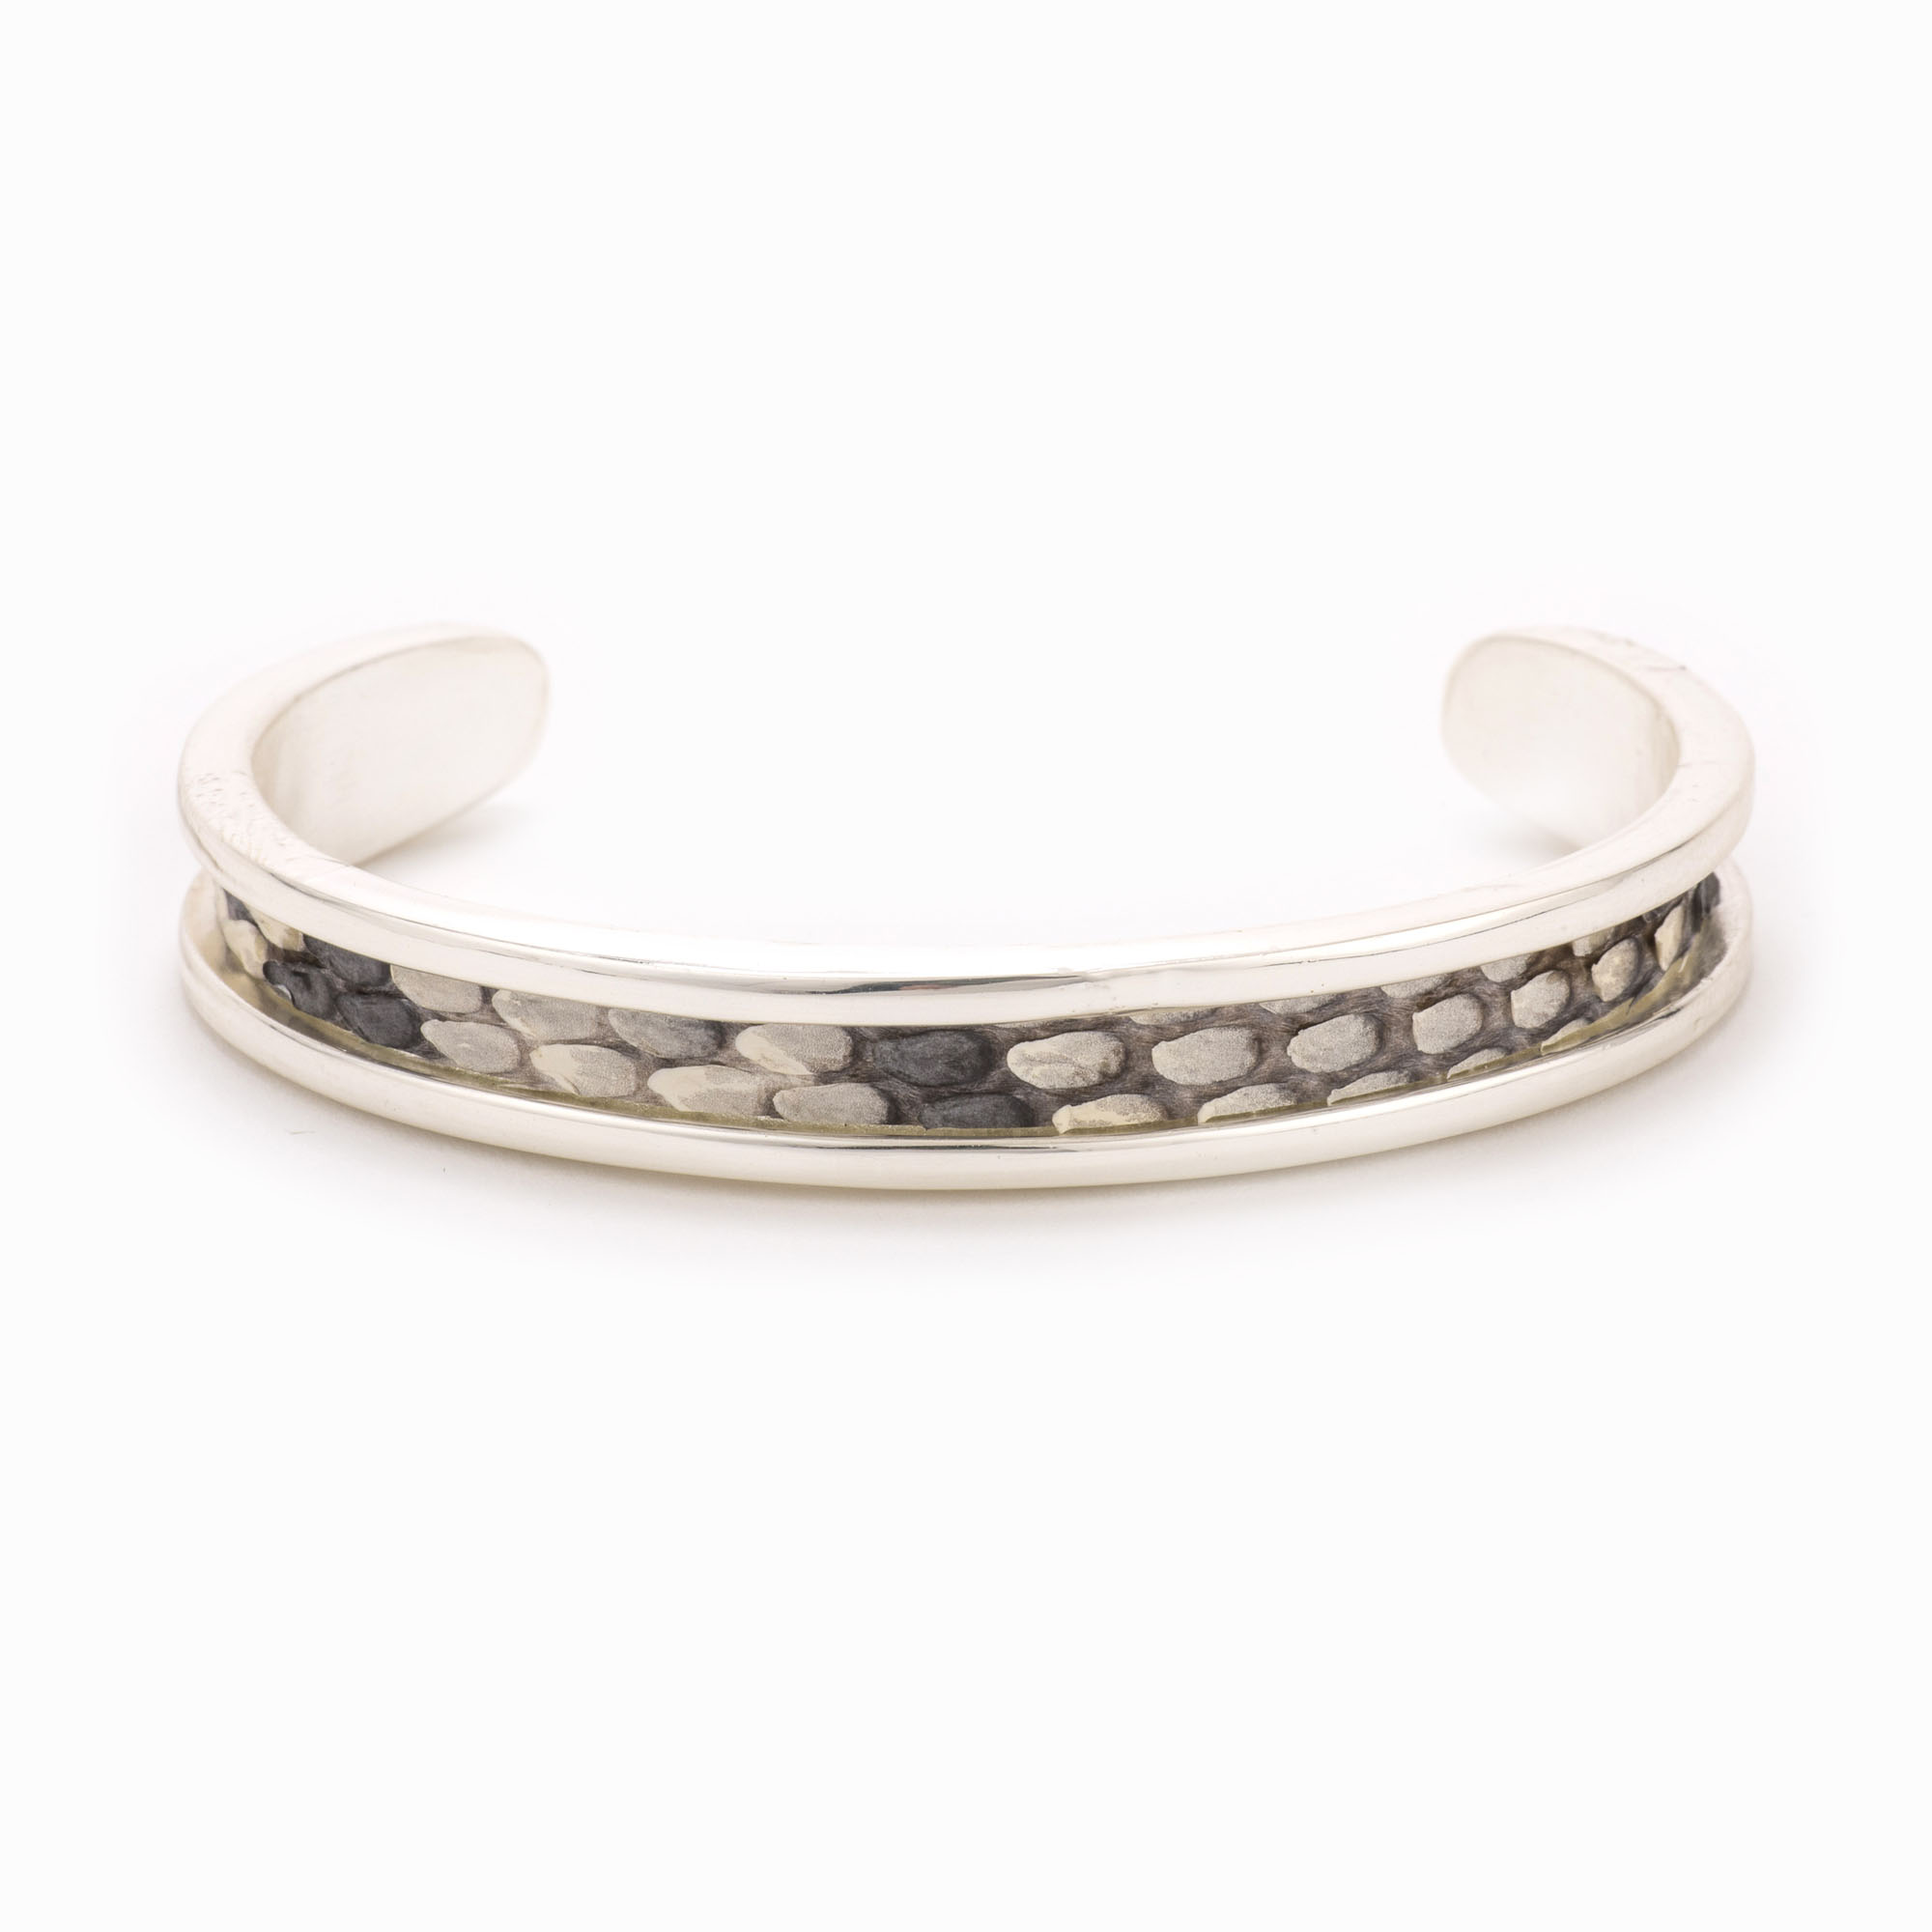 Featured image for “Small Black & White Silver Cuff”